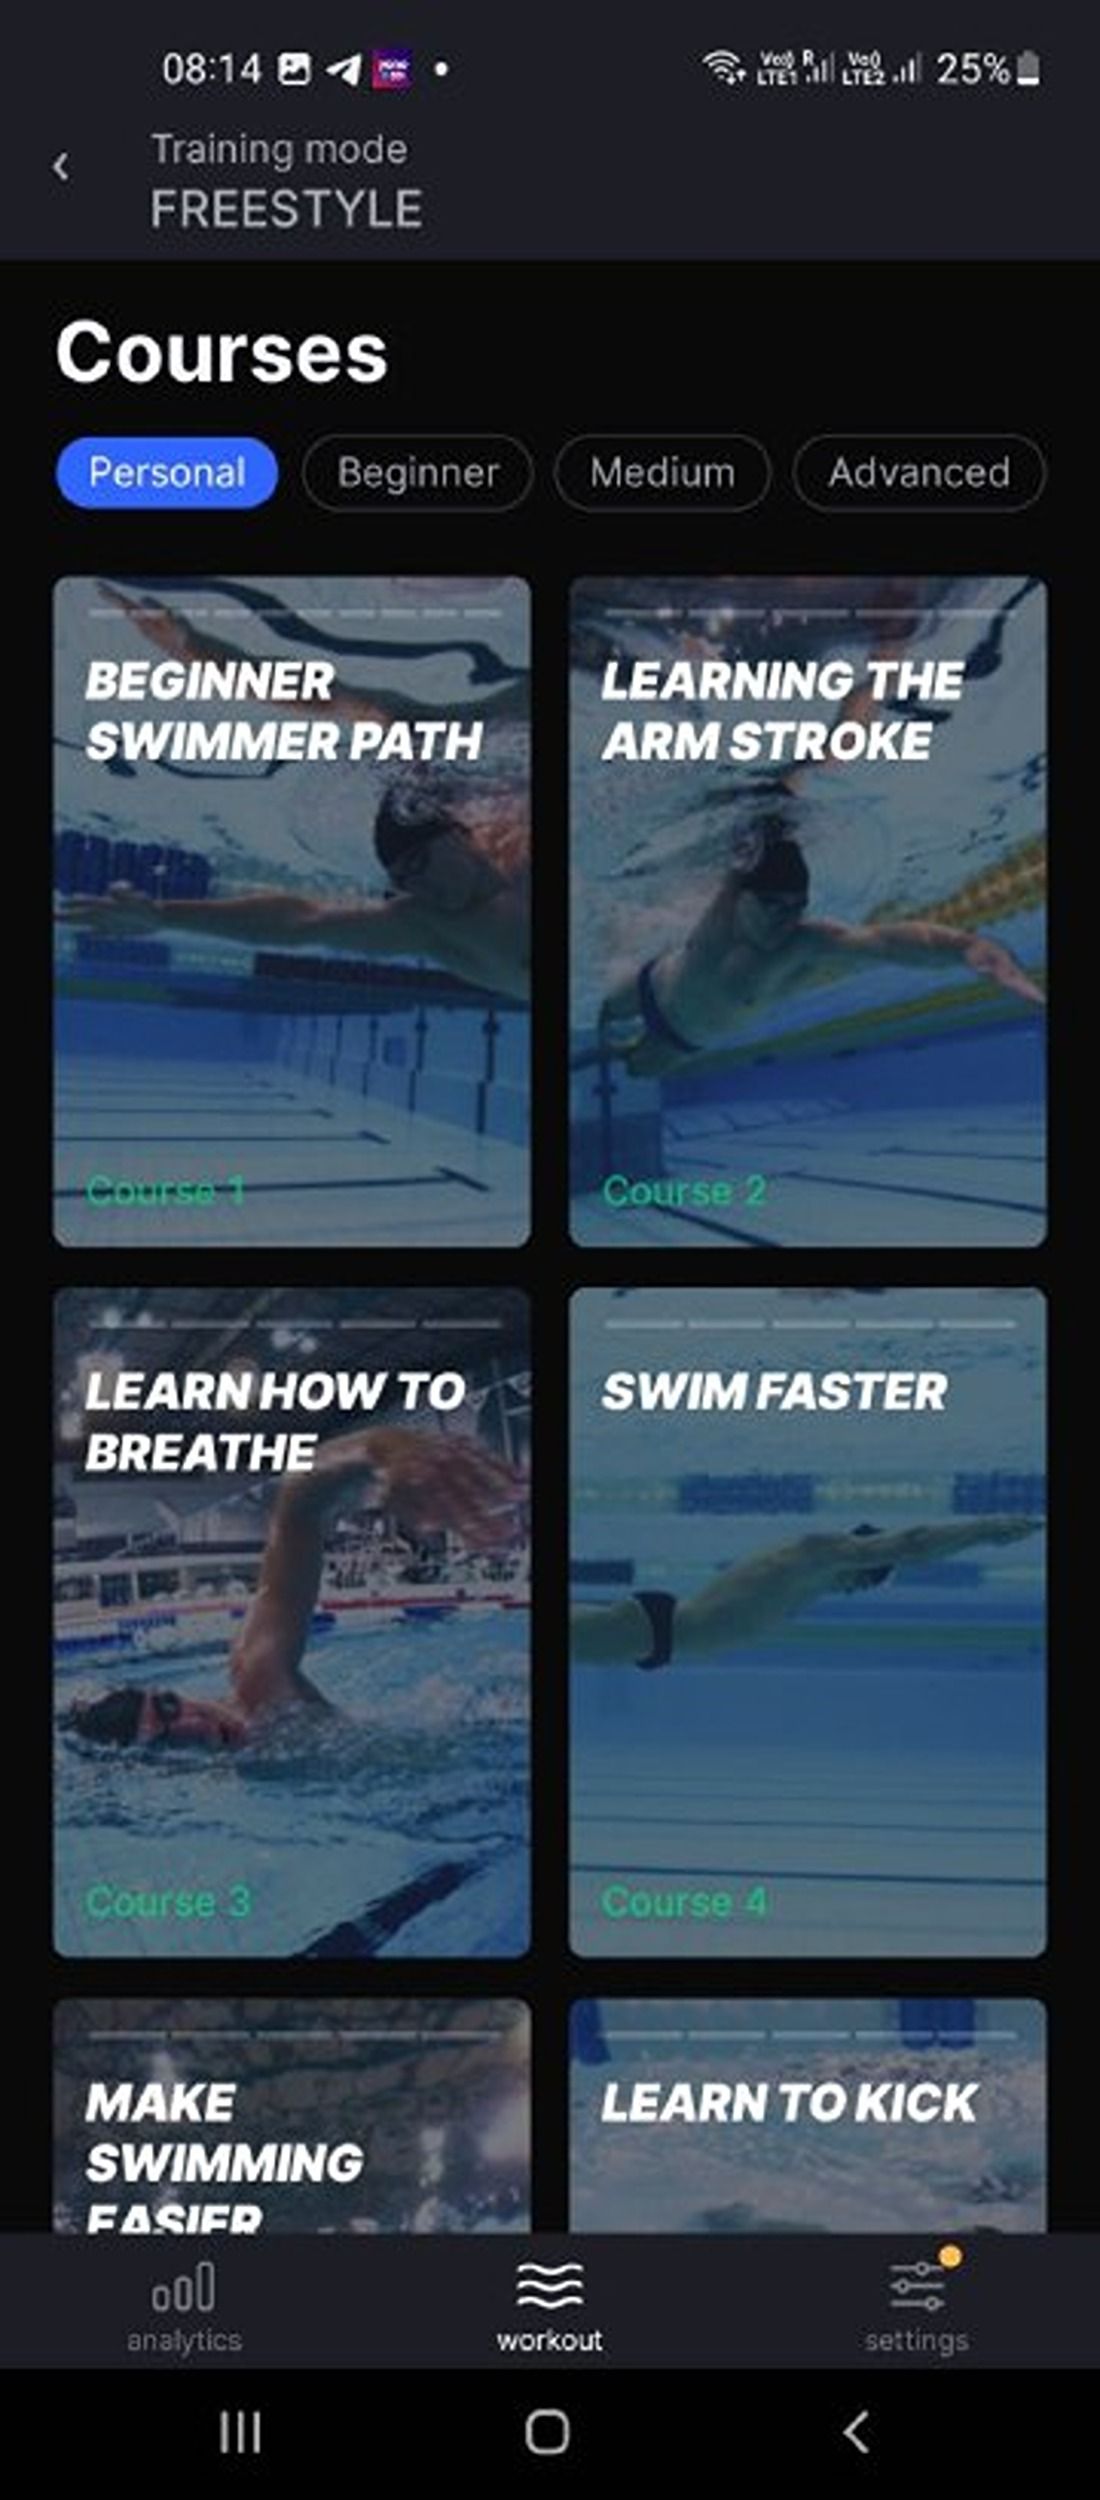 Instructional videos in the SwimUp apps